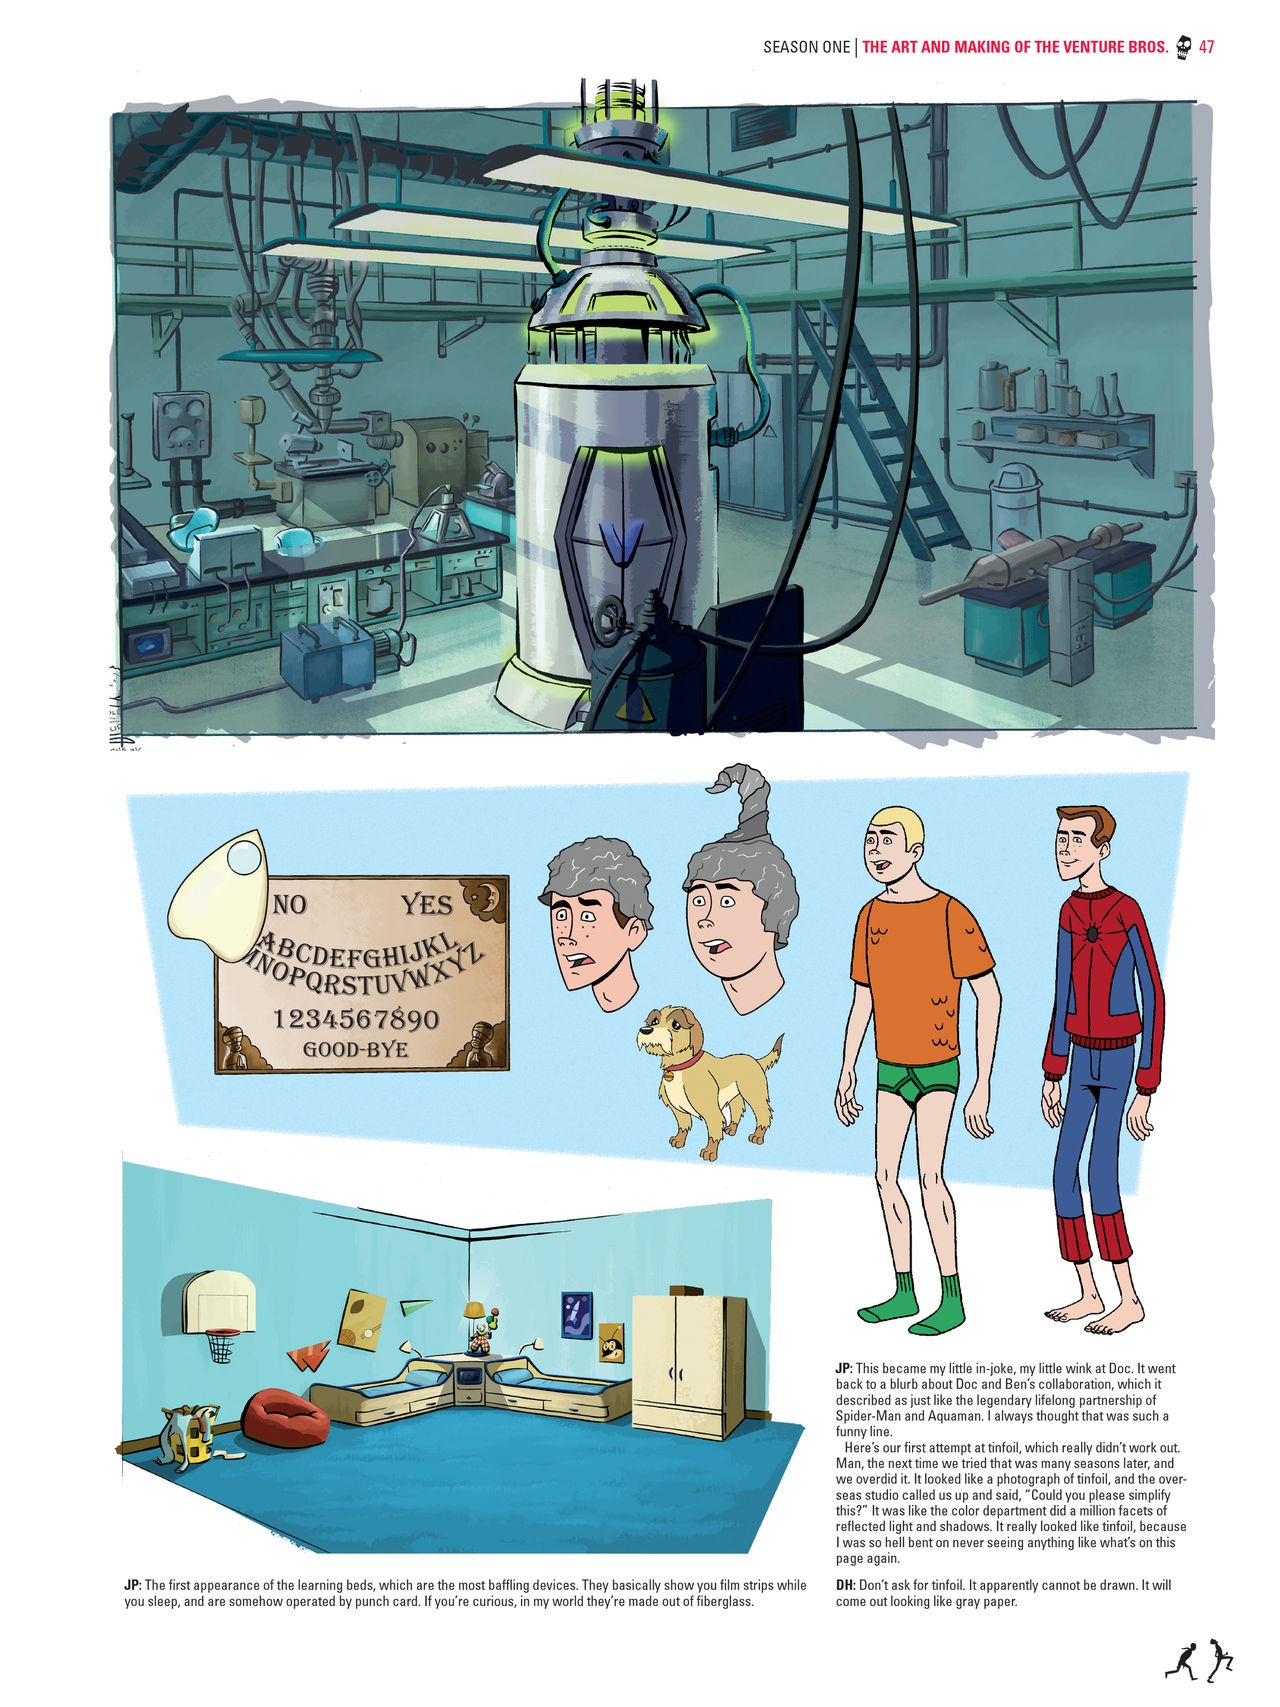 Go Team Venture! - The Art and Making of the Venture Bros 46